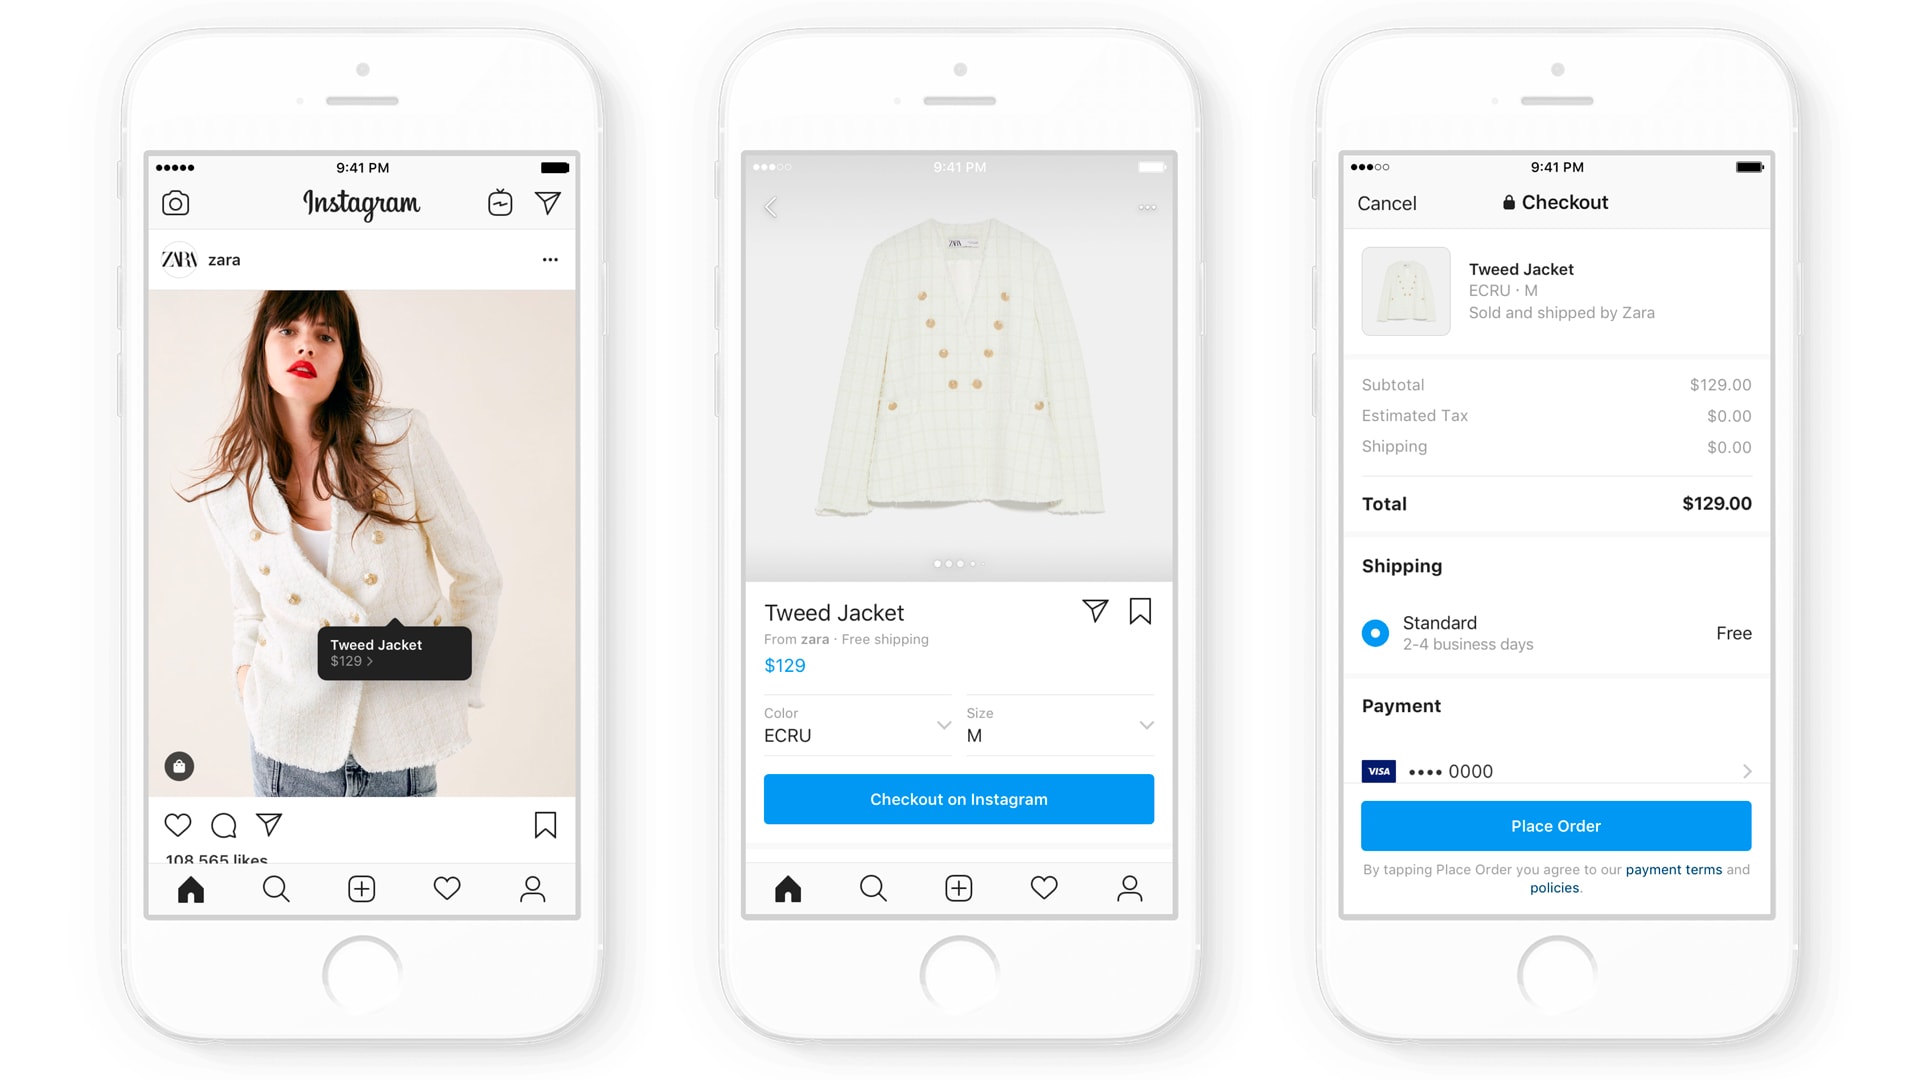 Now you can shop and buy stuff on Instagram without leaving the app